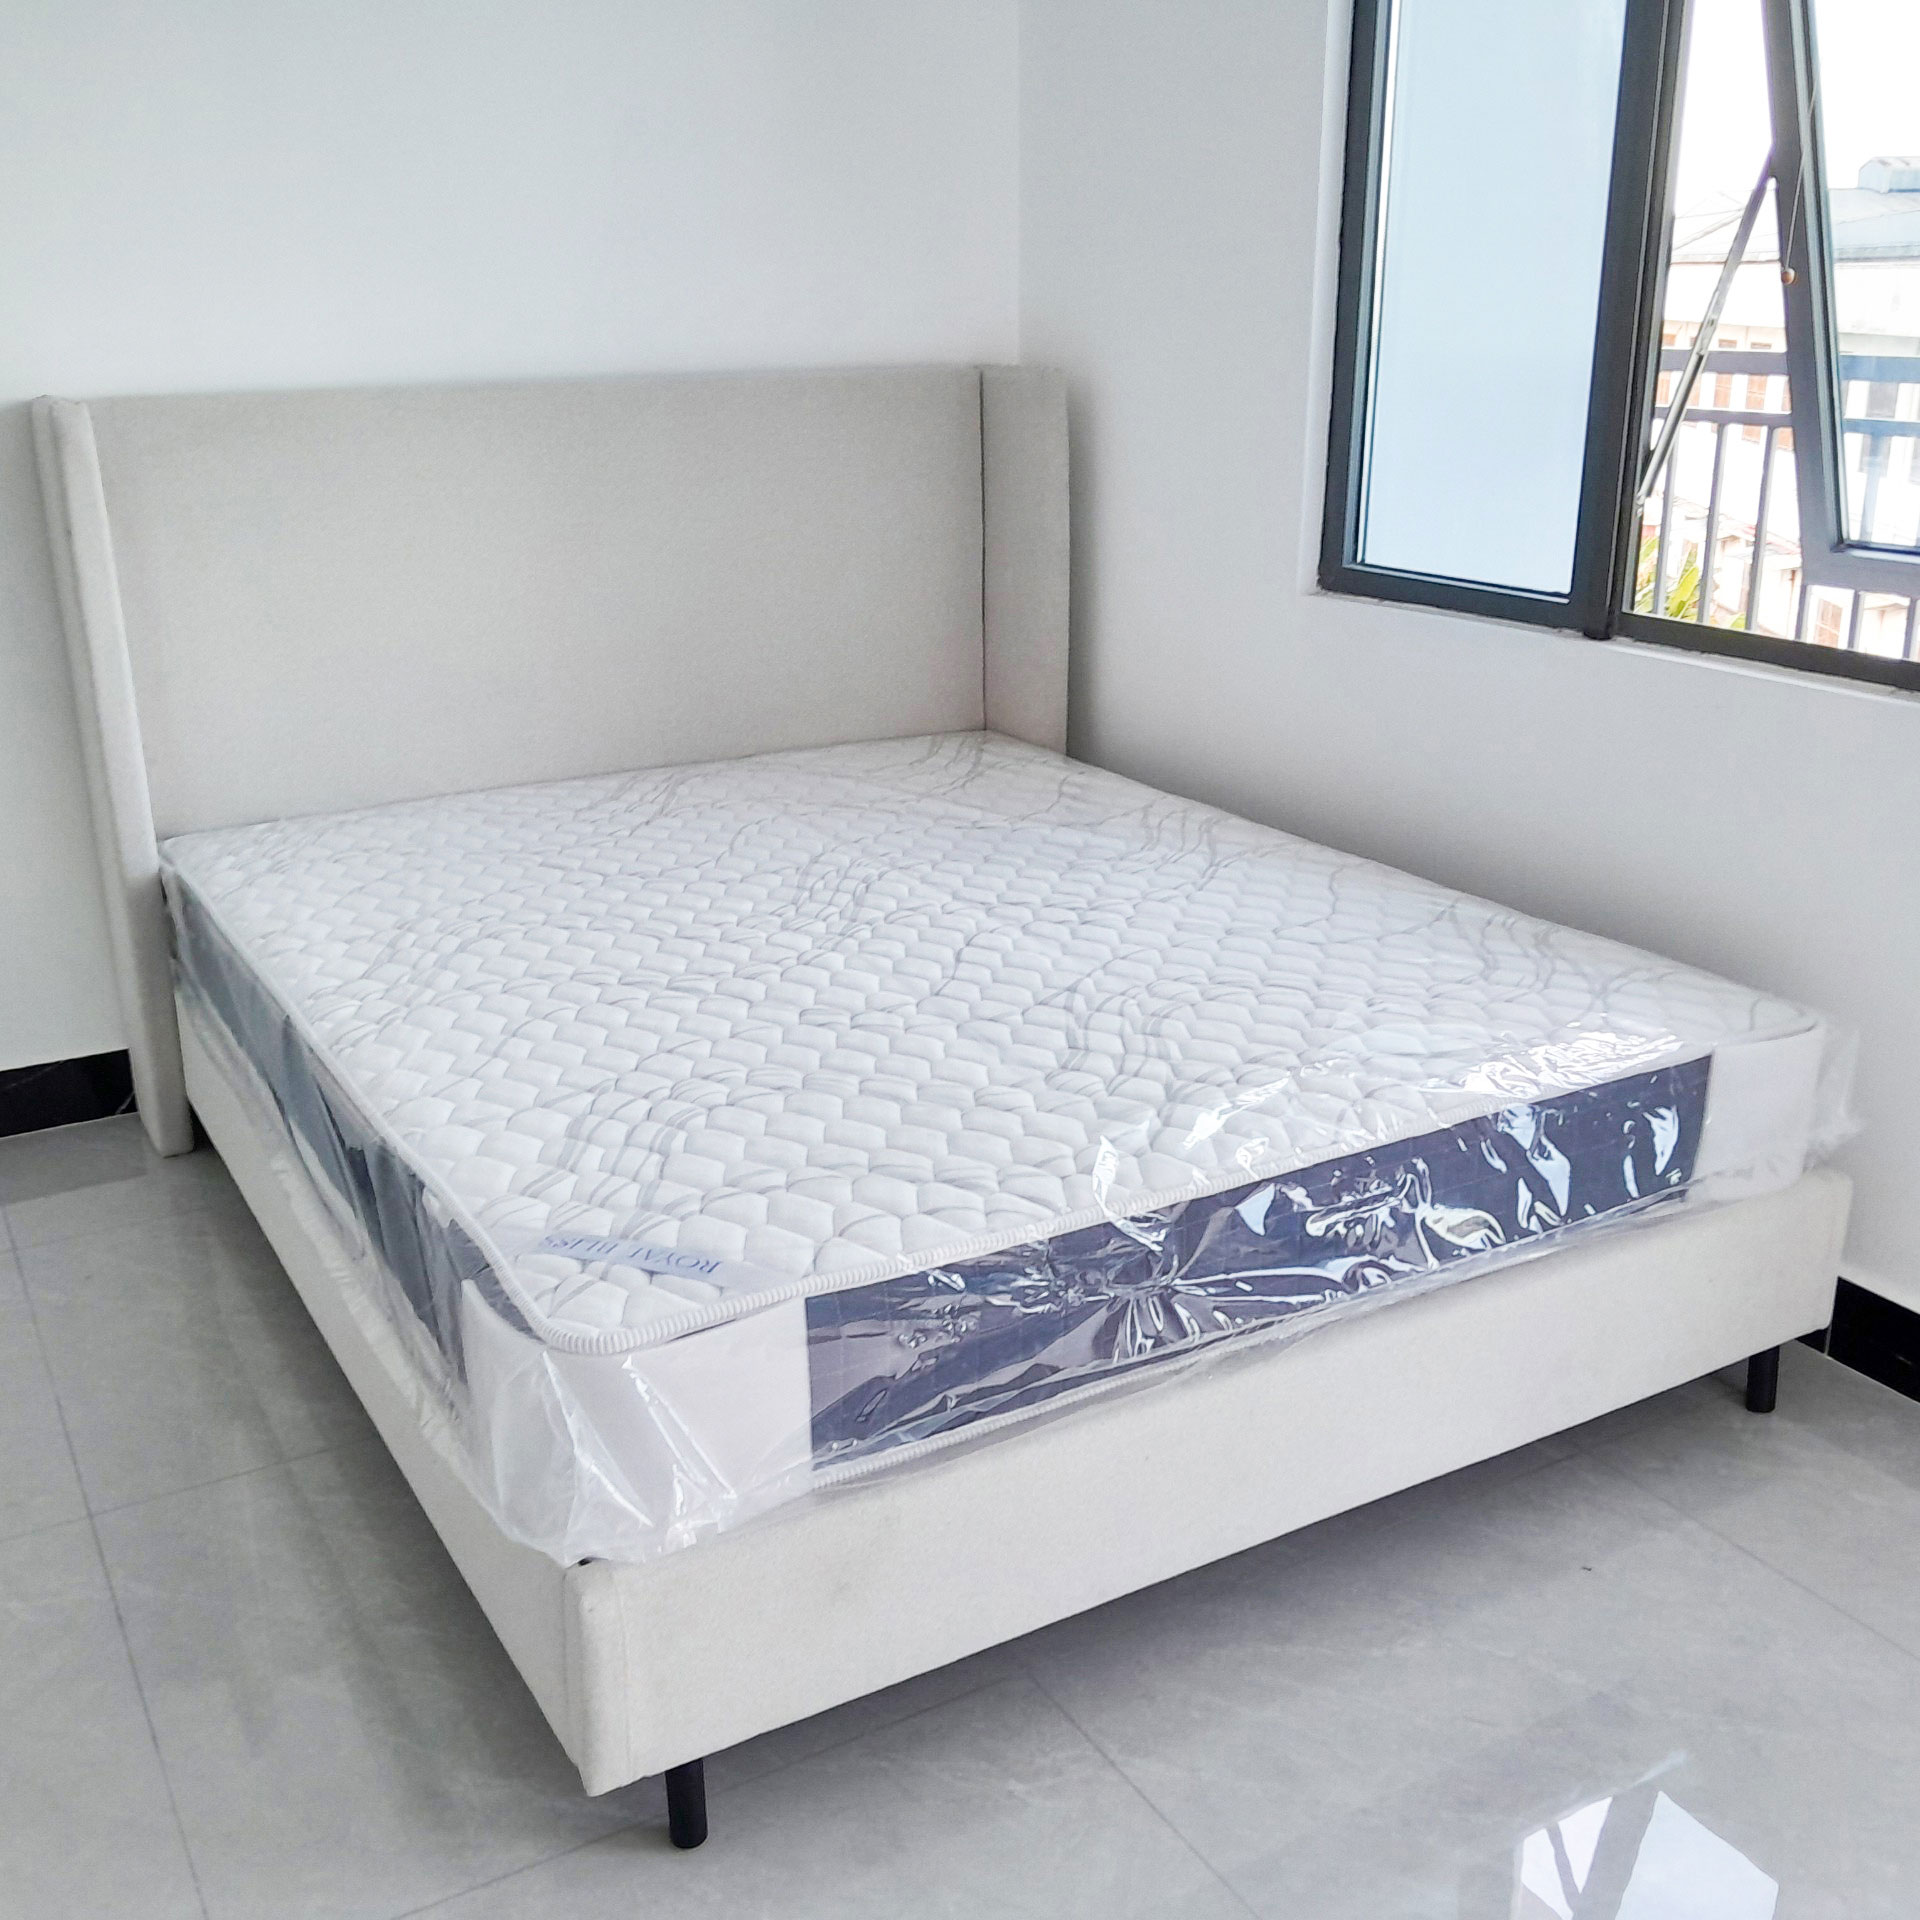 giường-ngủ-xdaily-bed (3)